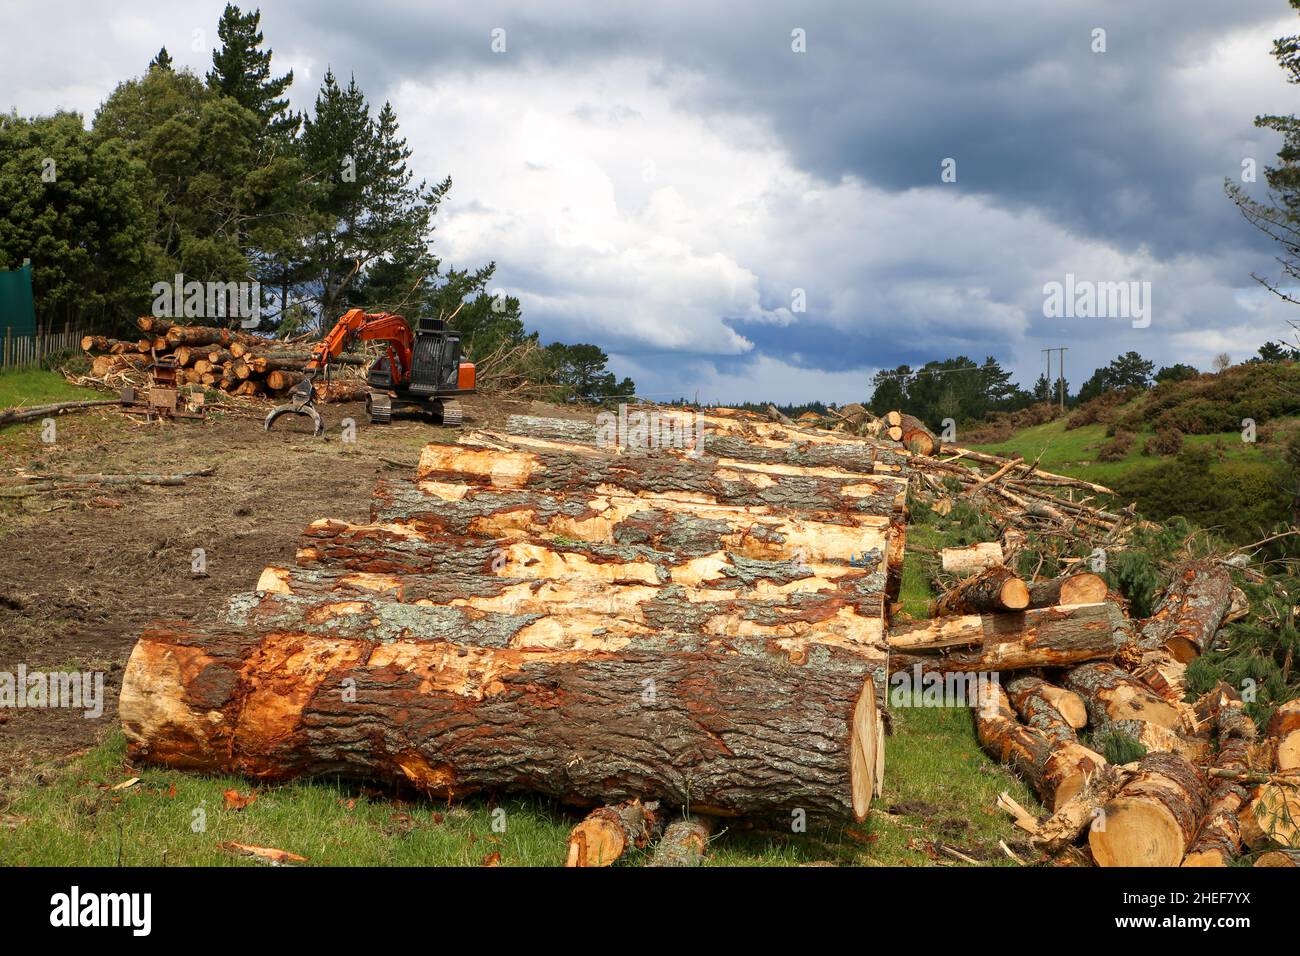 Pine logs felled and cut ready to be stacked onto a log truck for removal. Heavy forestry machinery used for mature trees. North Island, New Zealand Stock Photo